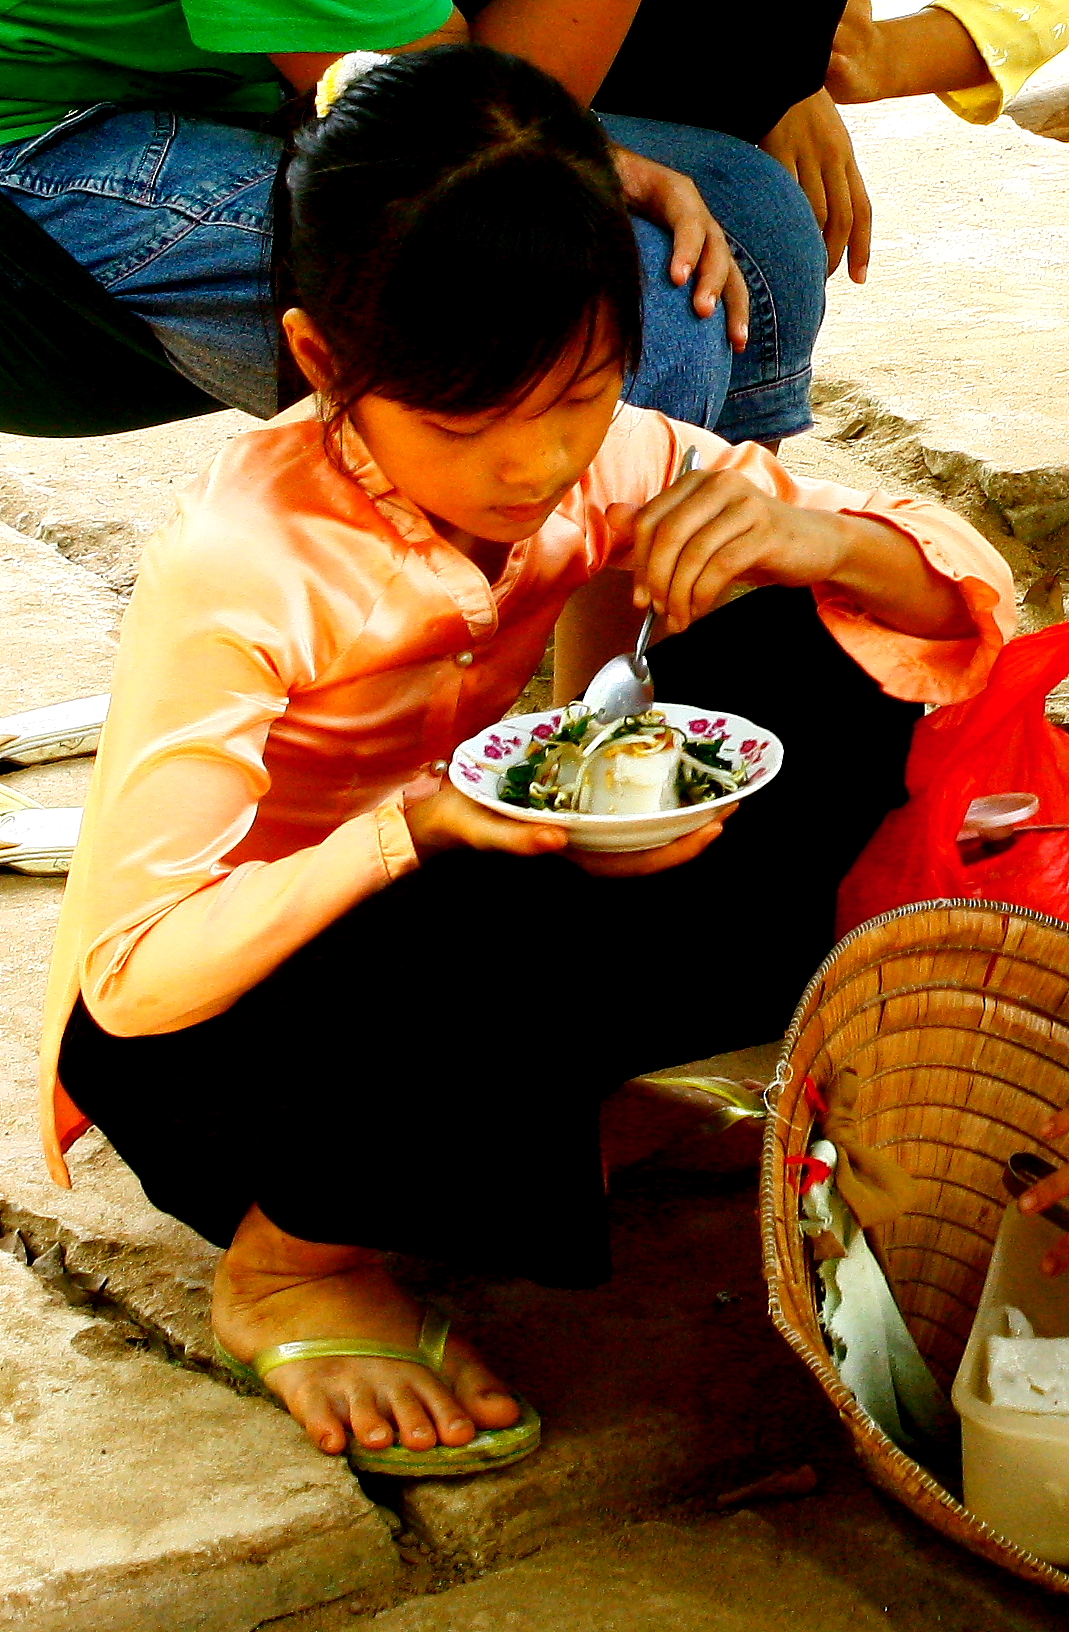 a woman sitting down eating from a white plate